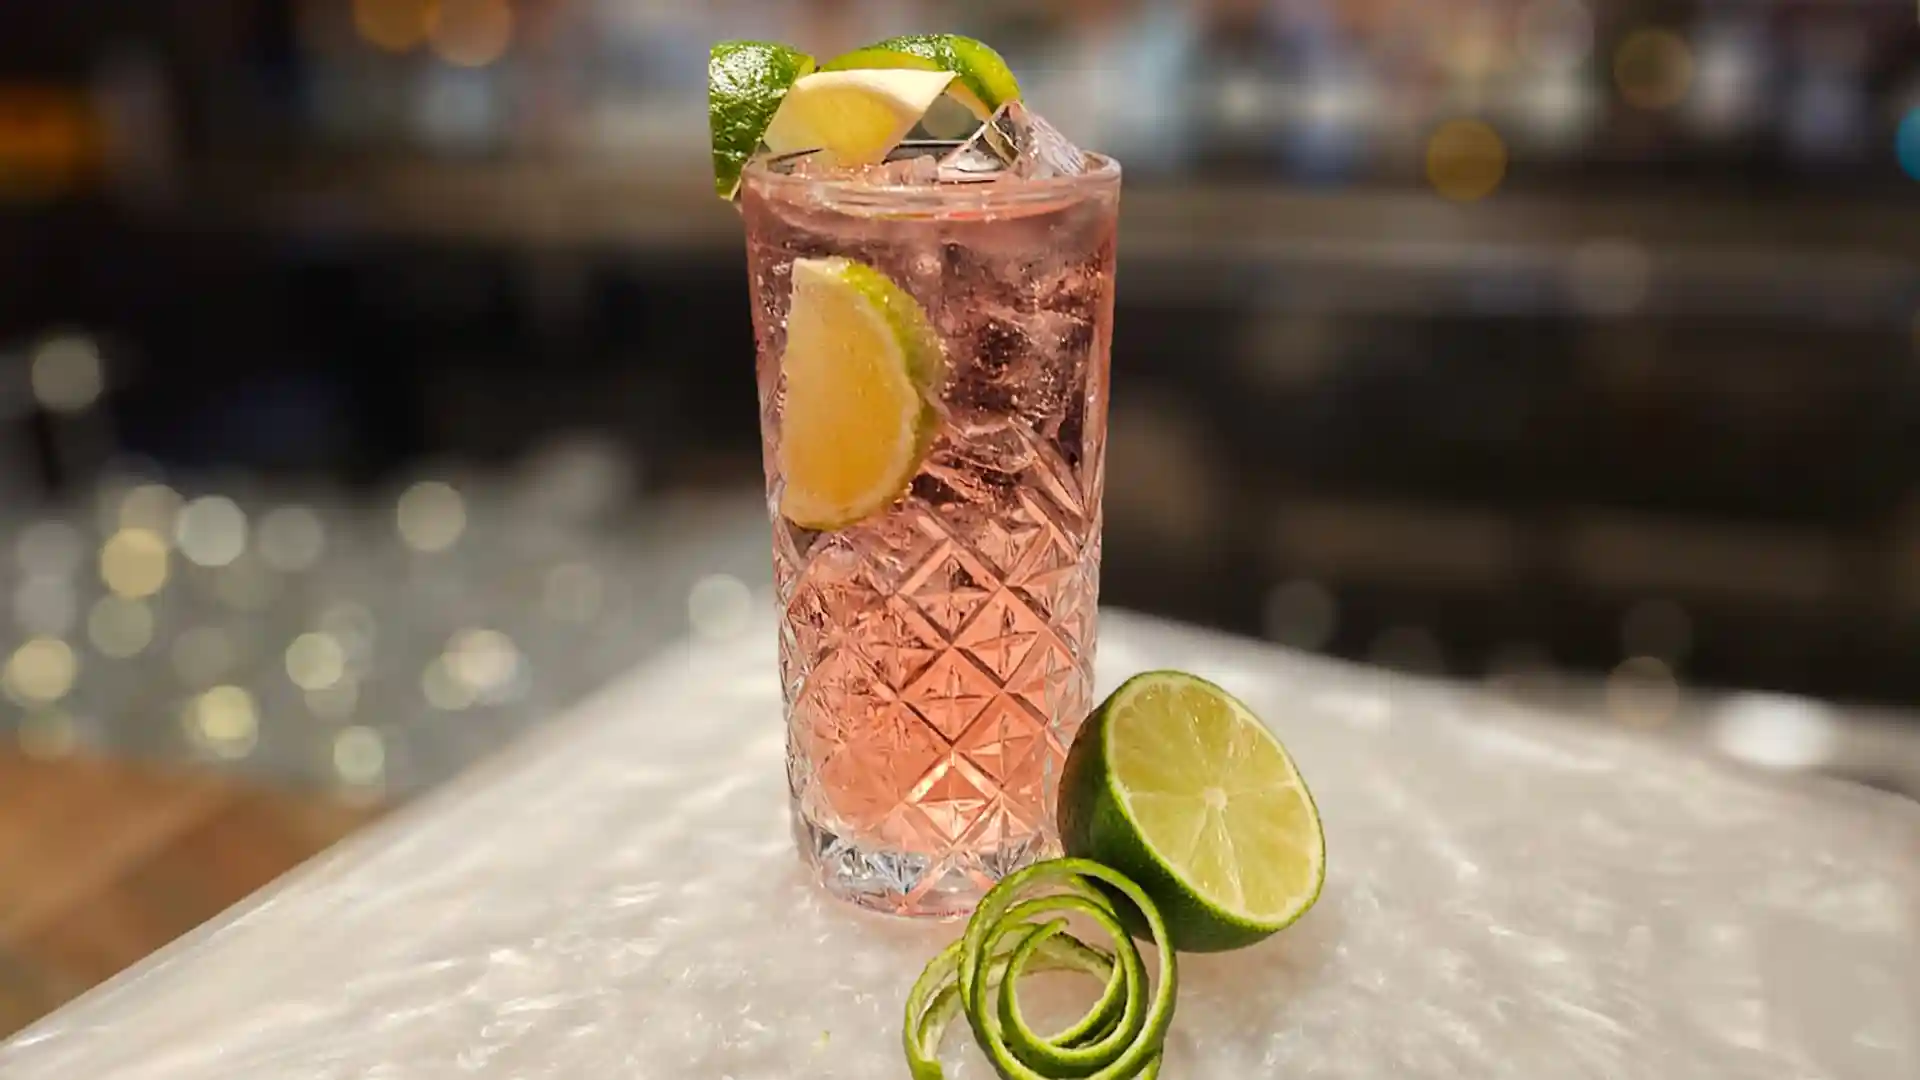 View of pink-colored cocktail with lime garnish.